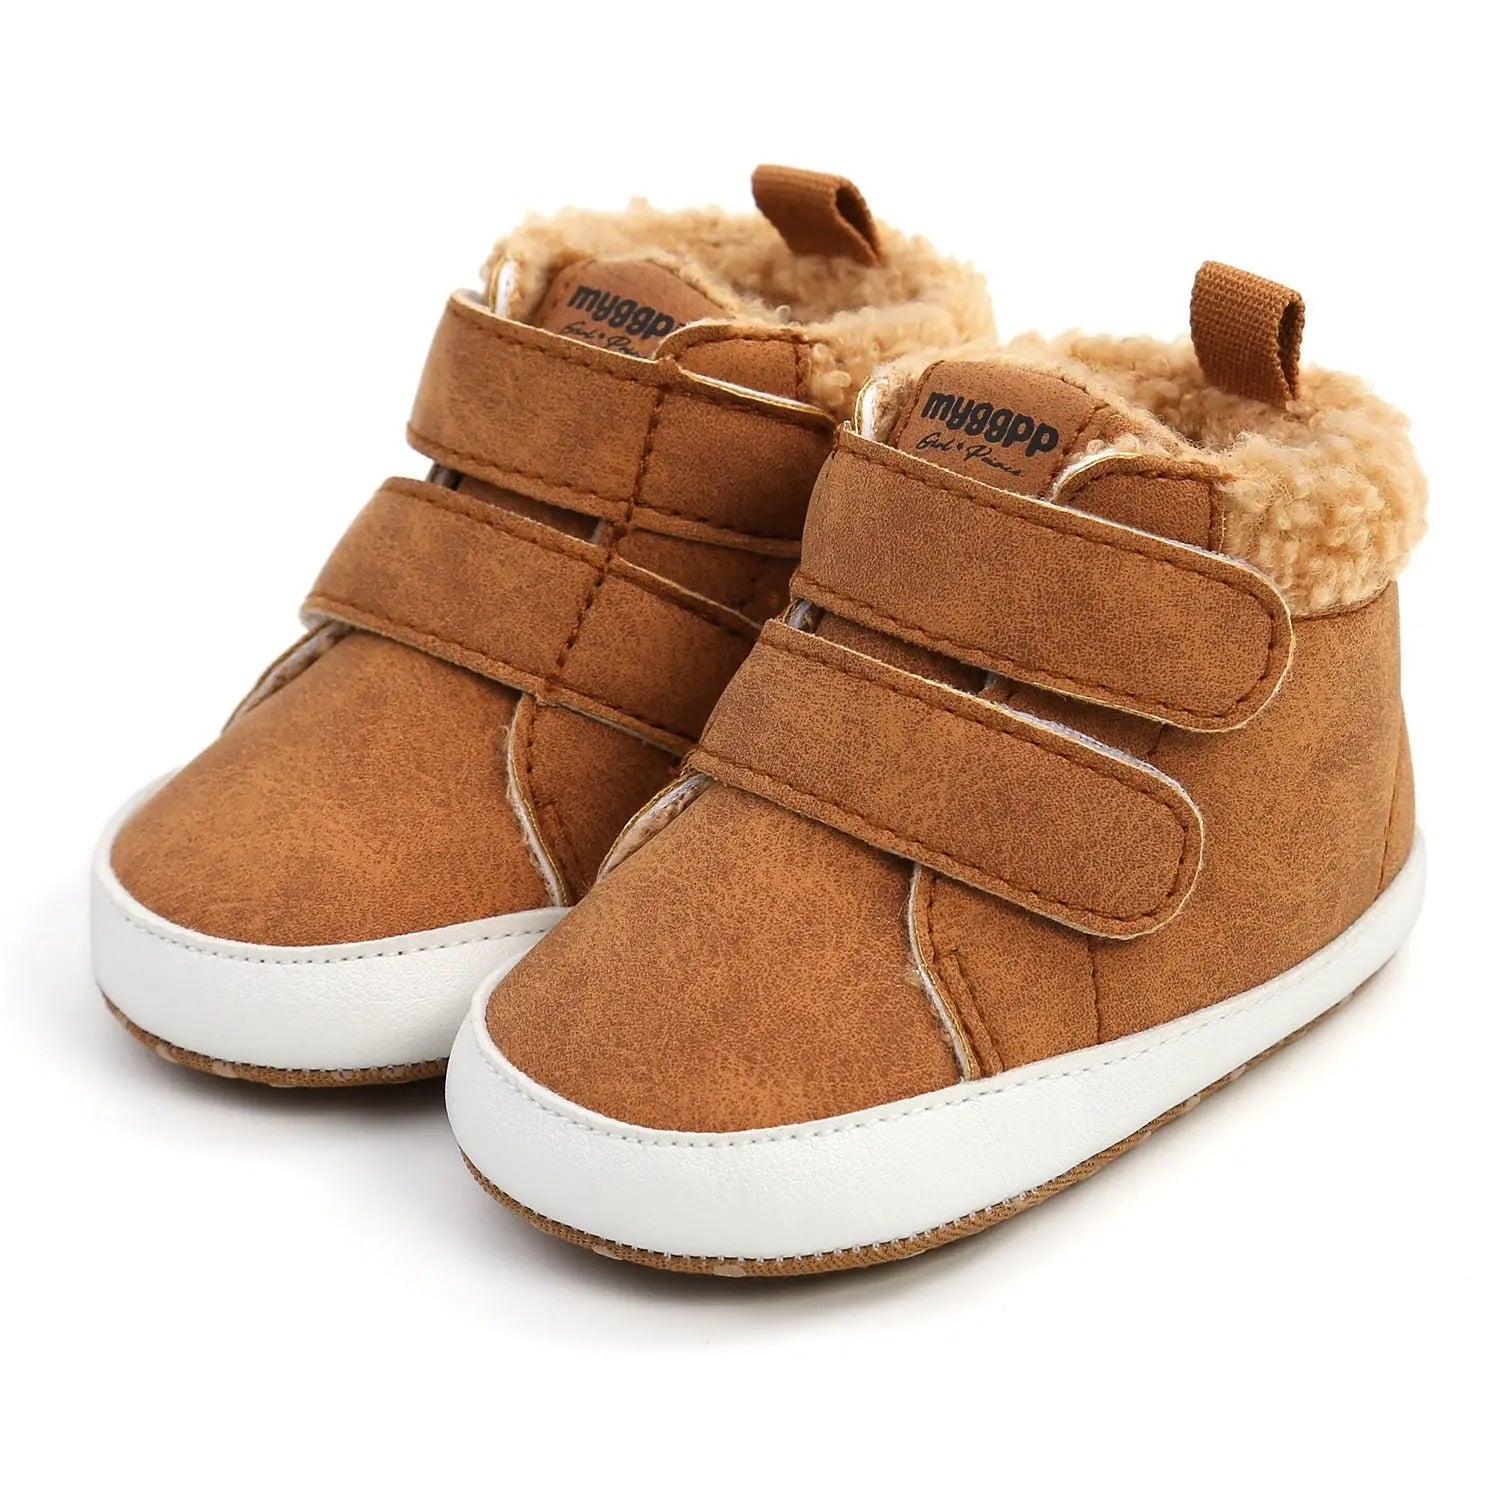 Baby Sunflower Warm and Stylish: High Top Baby Shoes for Autumn and Winter Walks